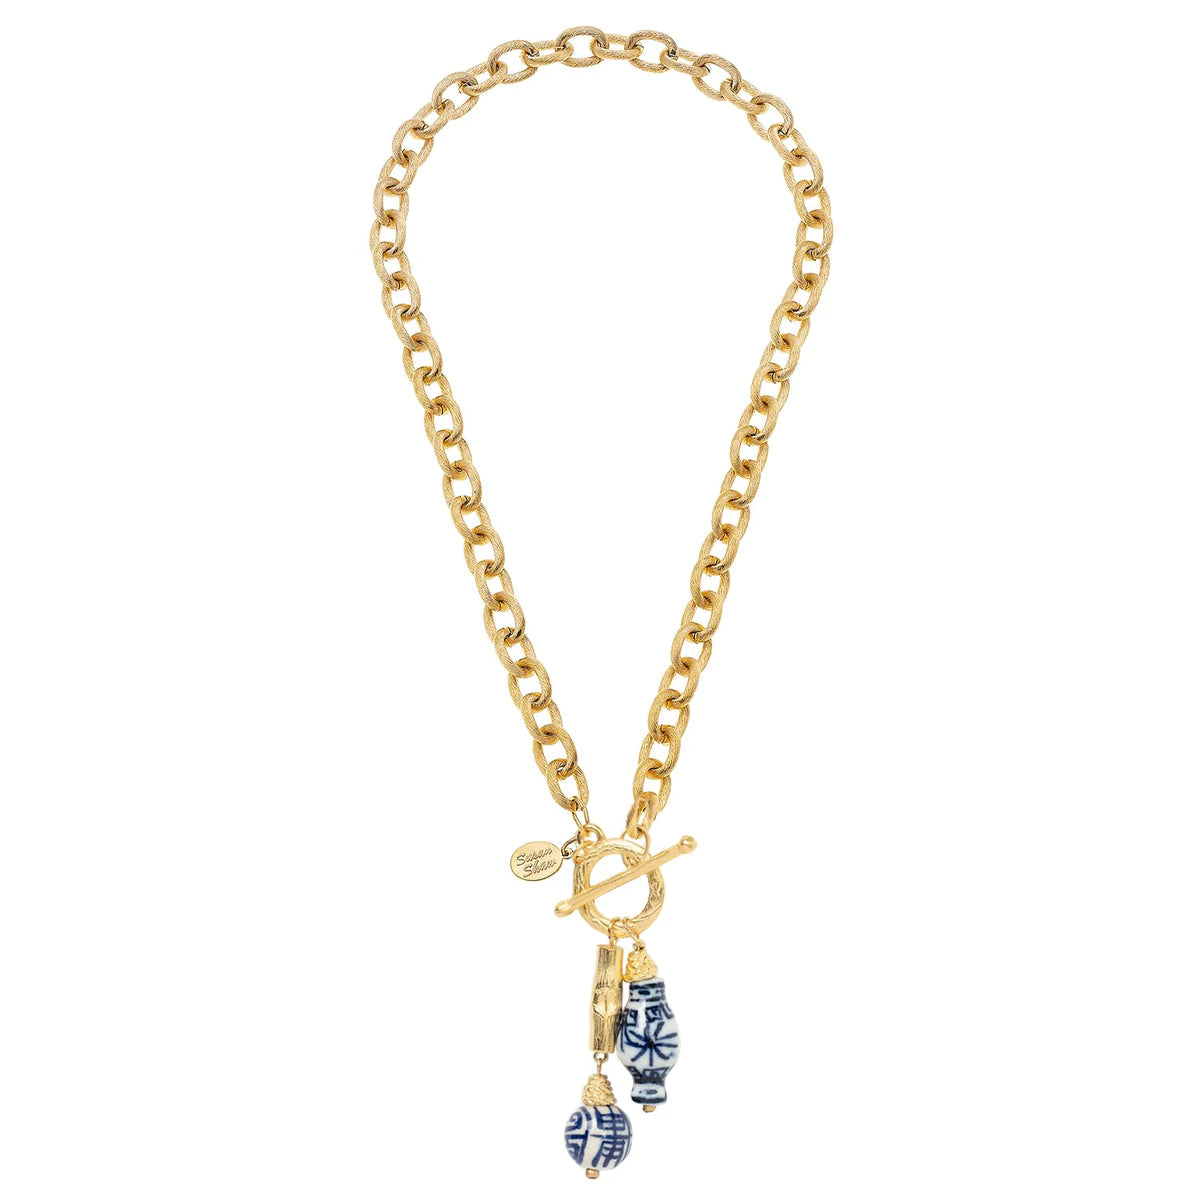 Susan Shaw Blue & White Bamboo Toggle Necklace